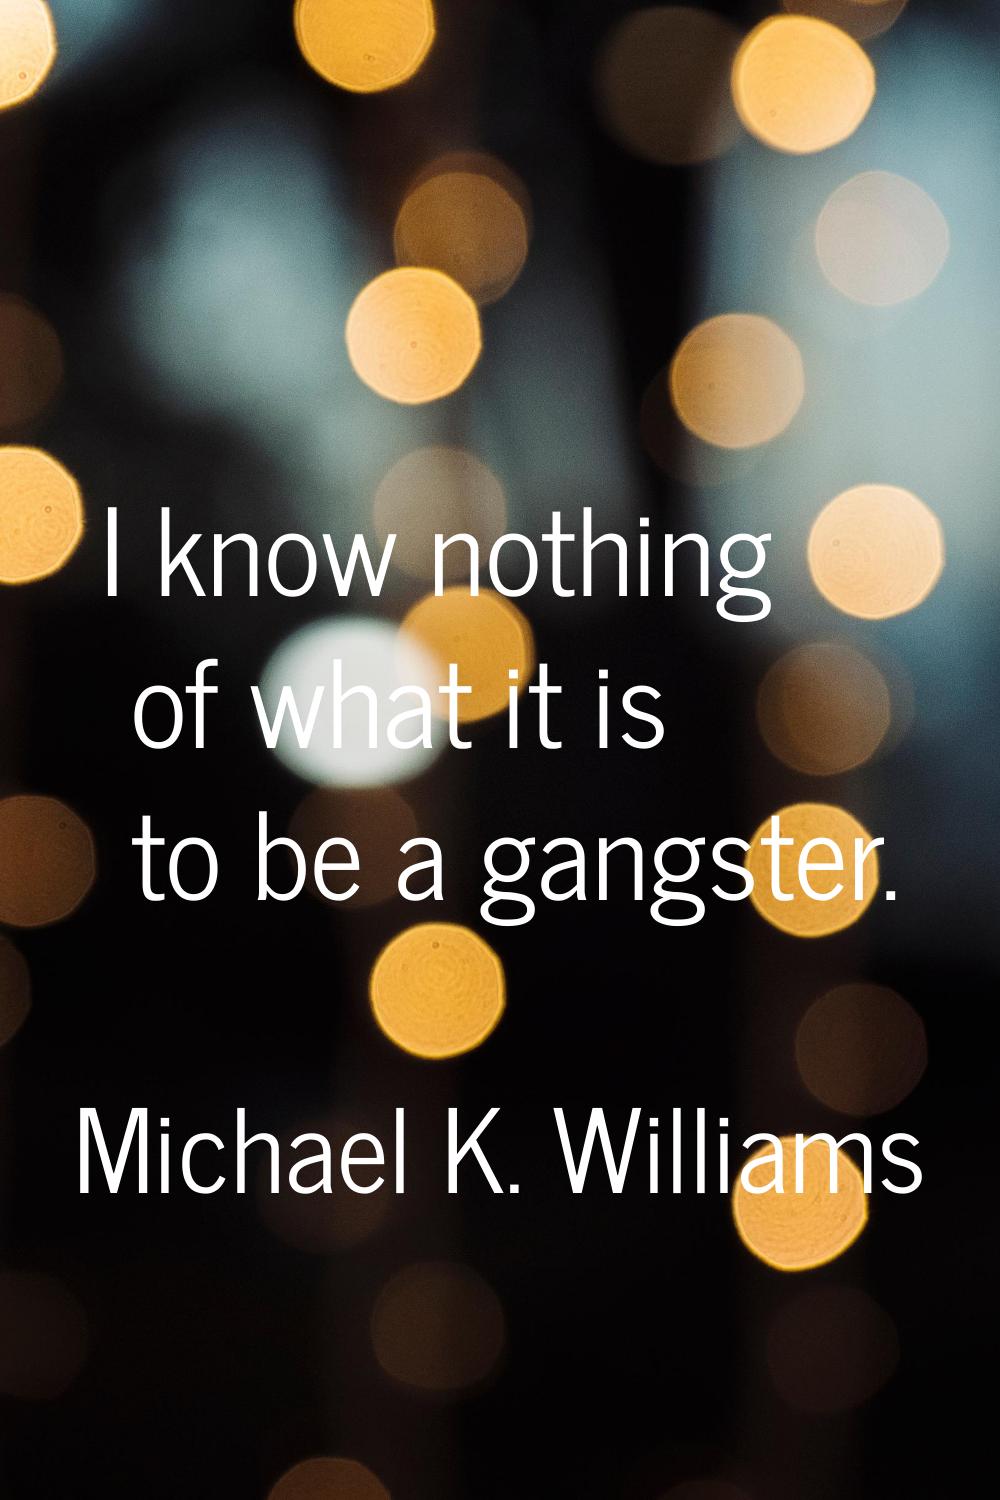 I know nothing of what it is to be a gangster.